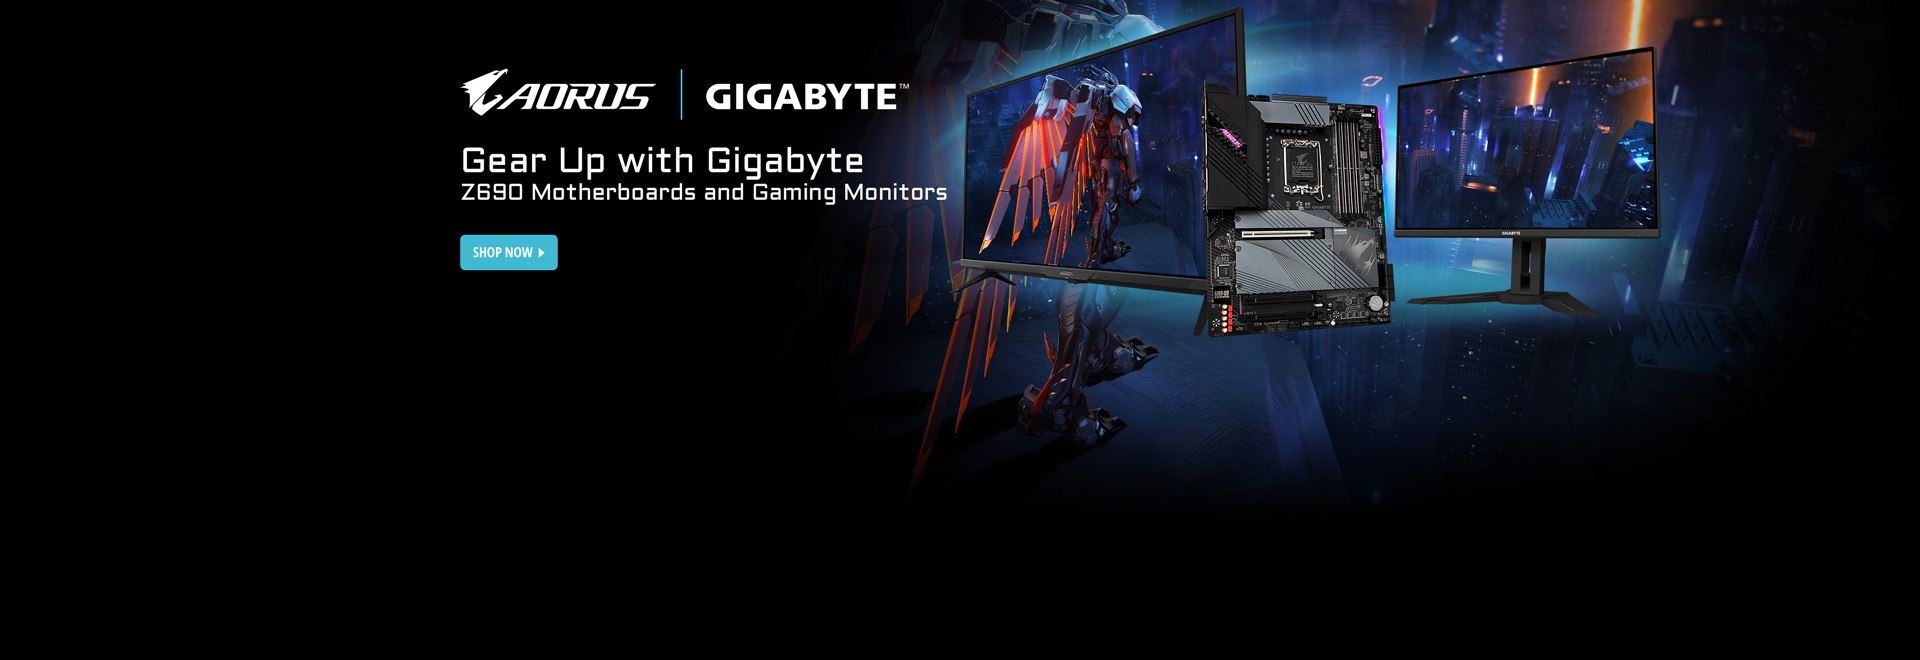 Gear Up with Gigabyte